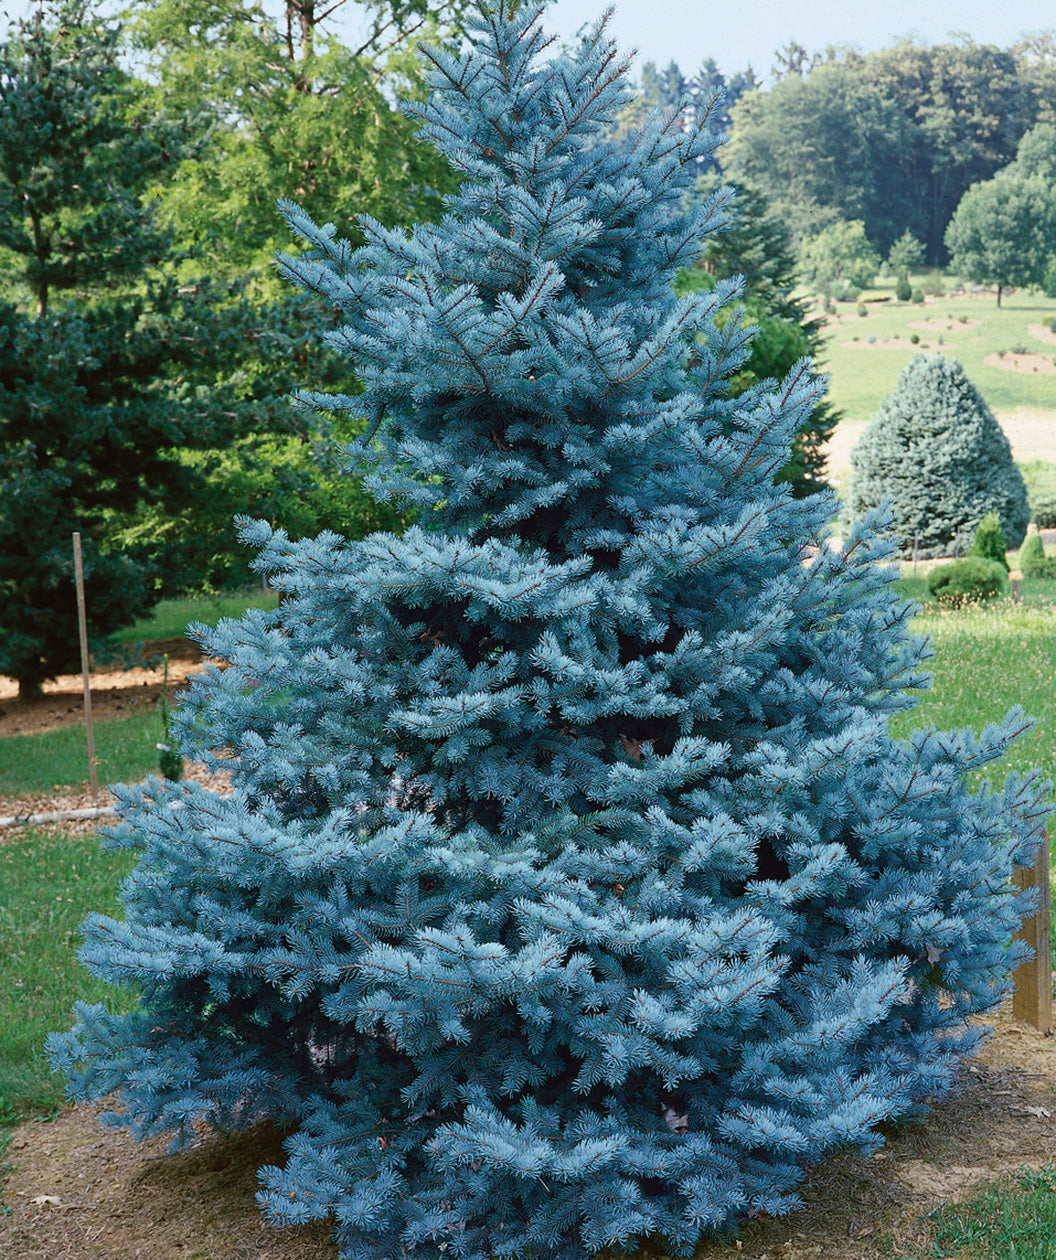 Blue Spruce, Product tags